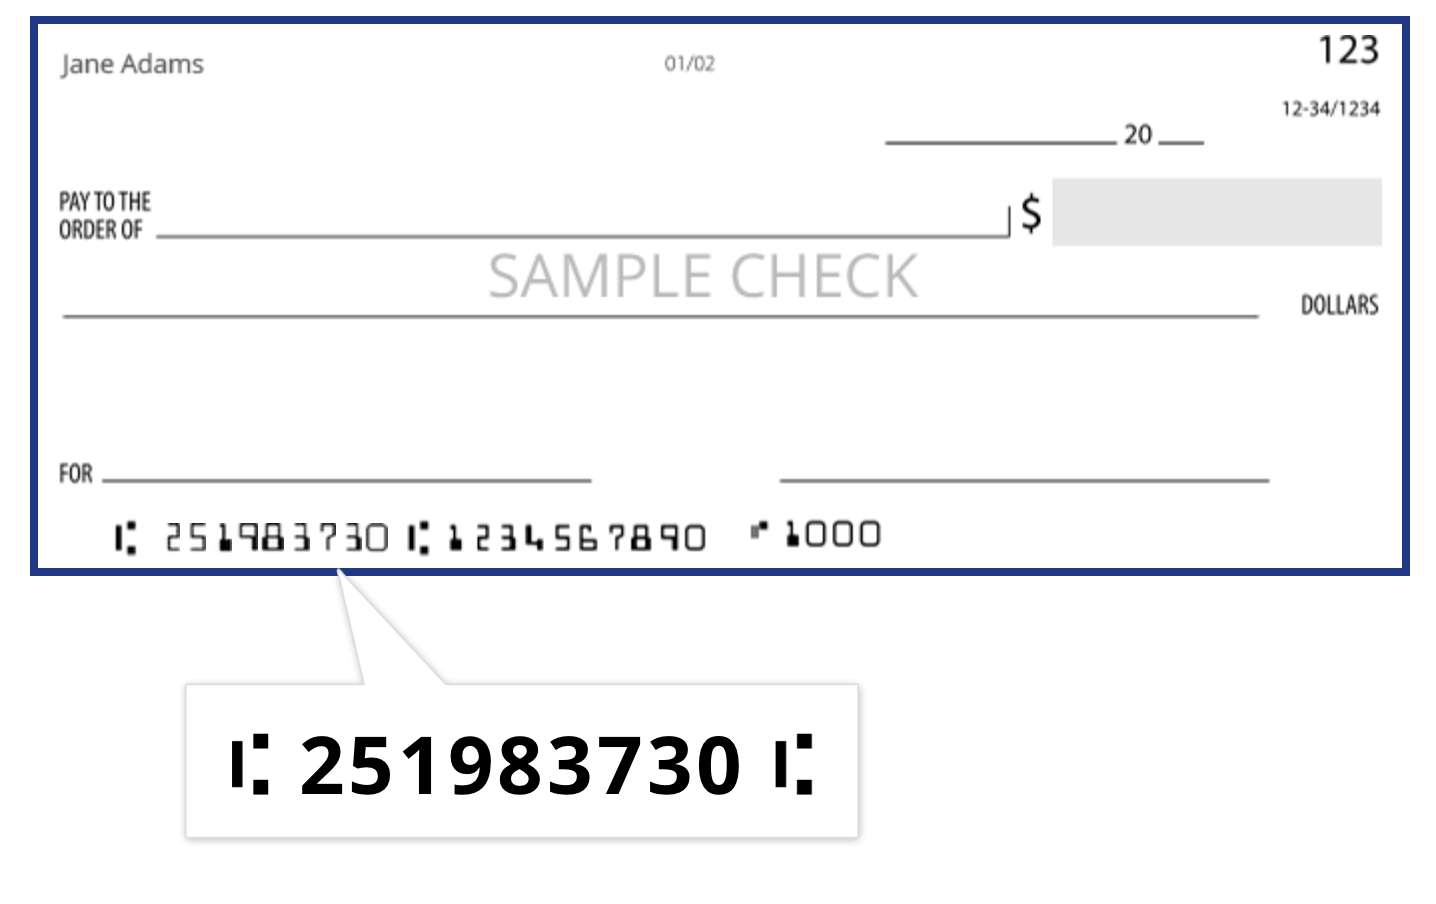 sample check image with routing number 251983730